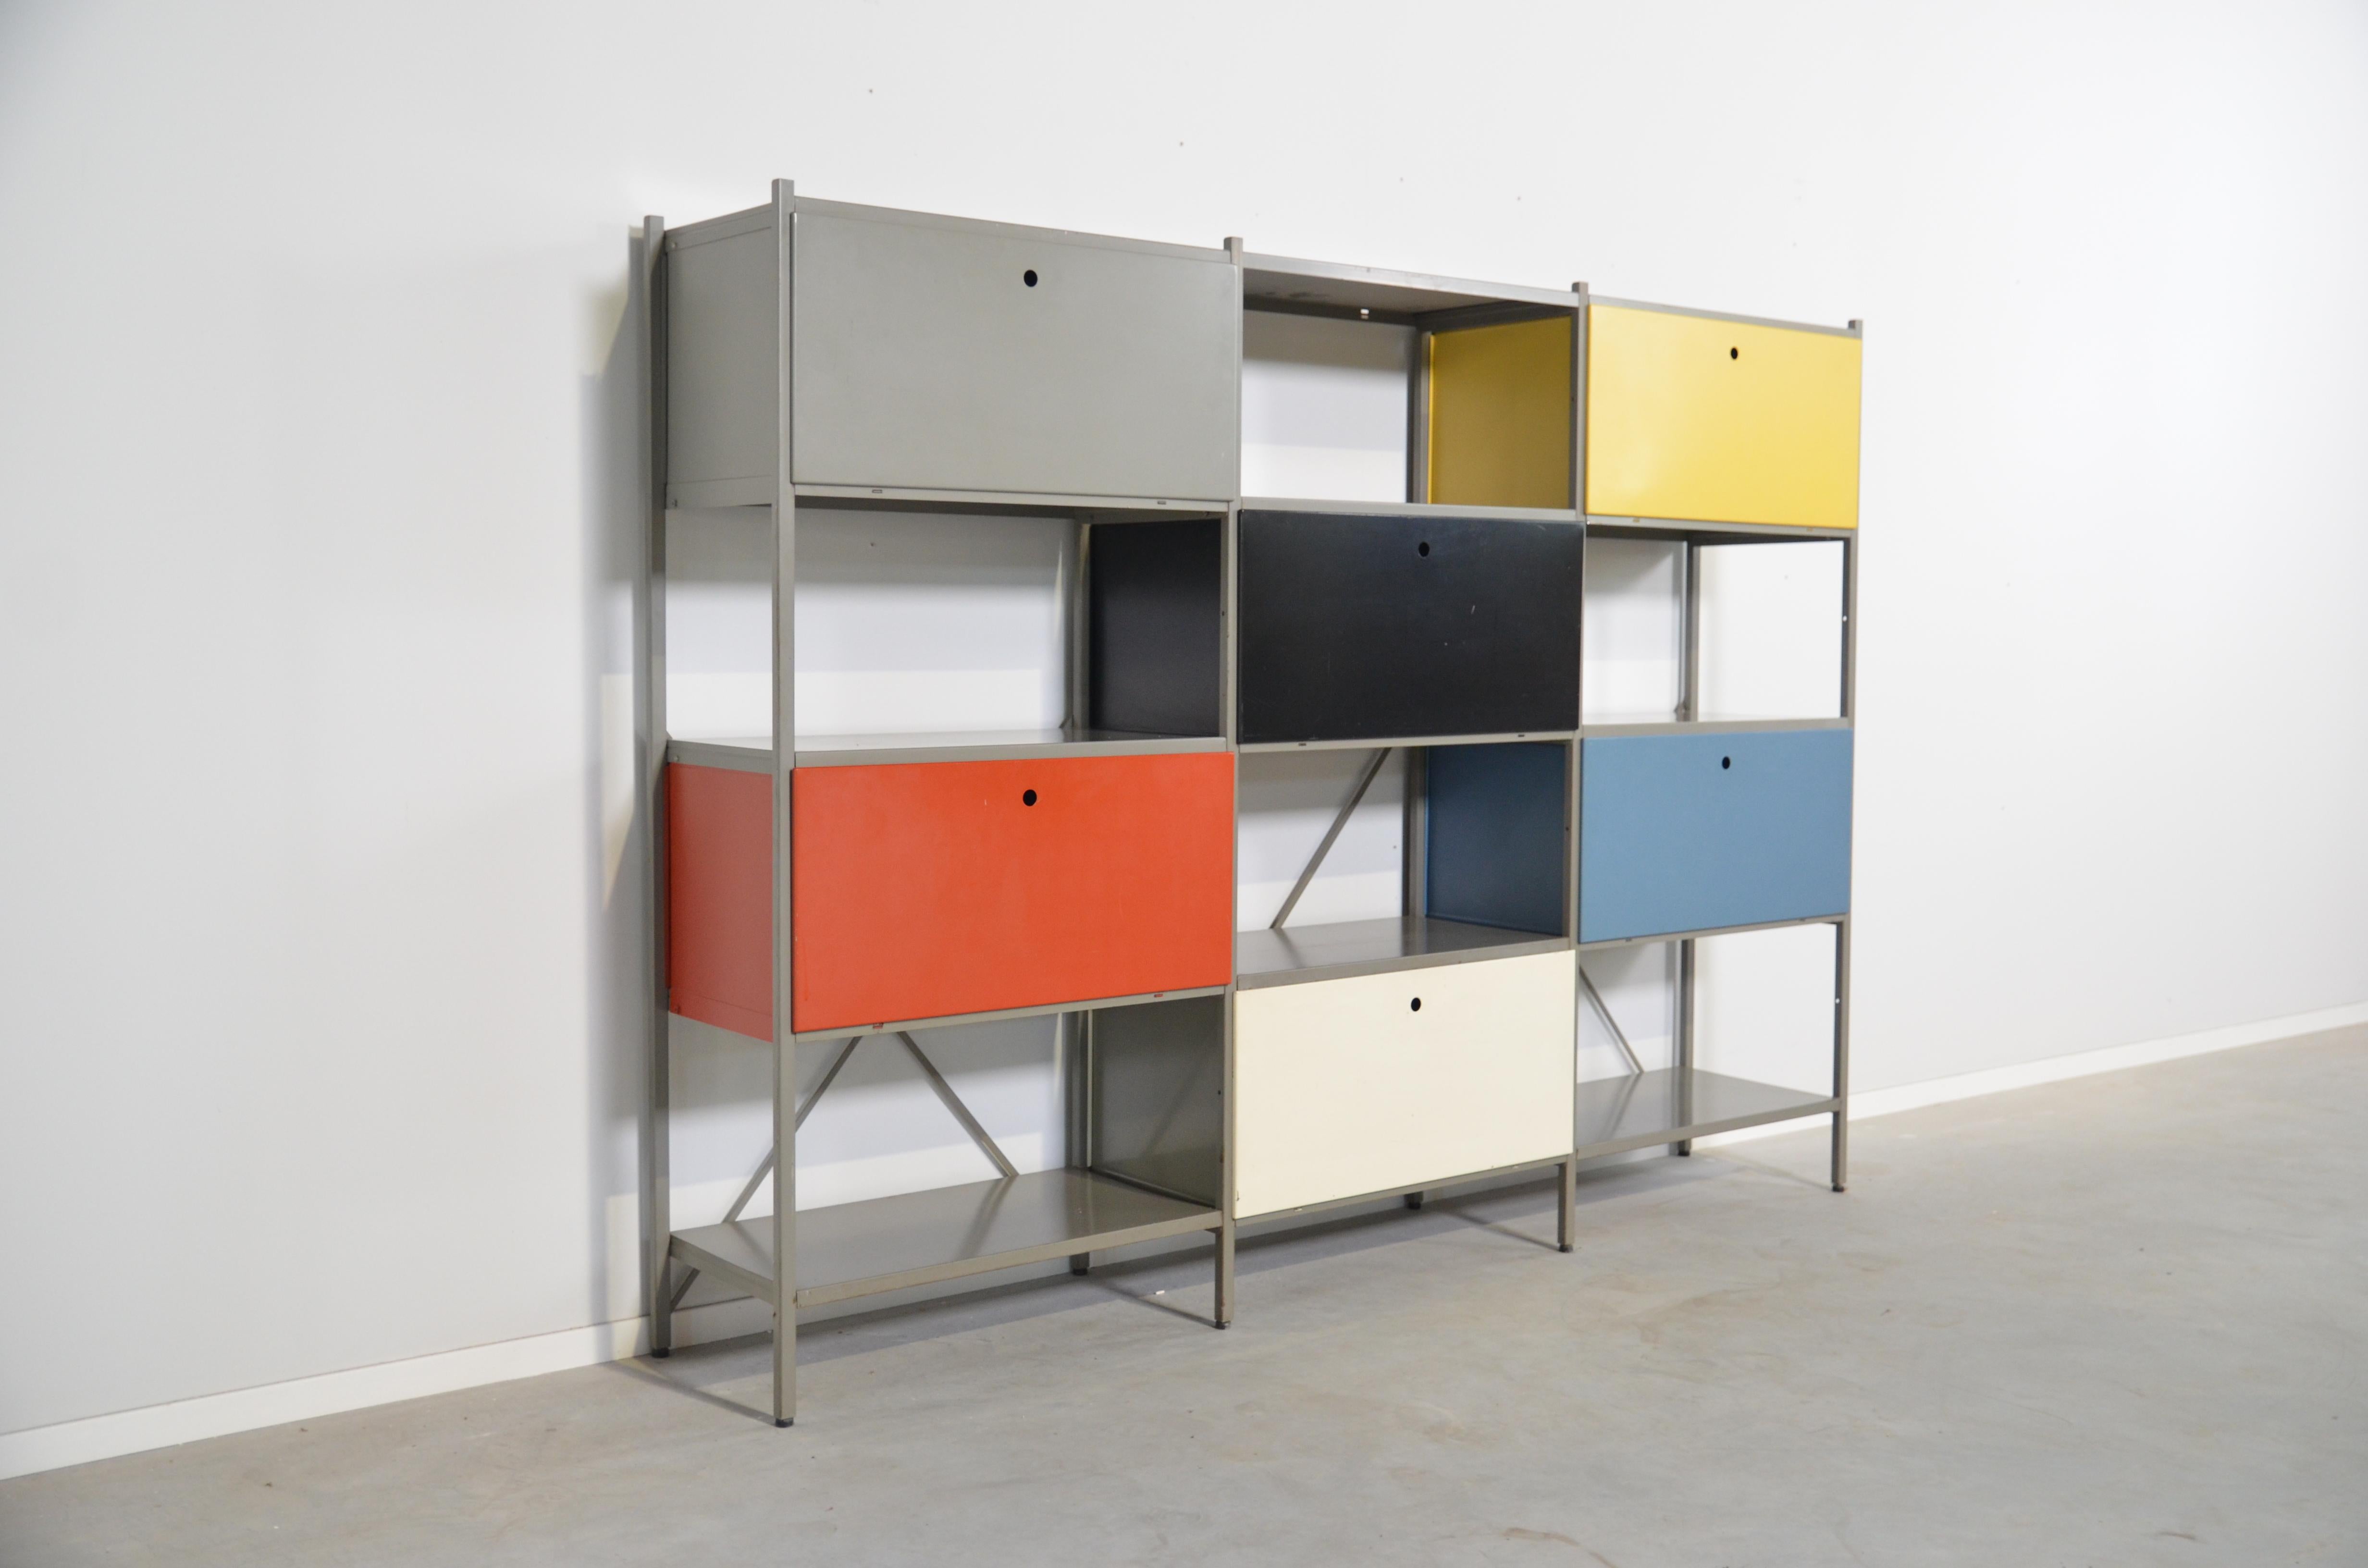 Industrial modulair wall system by Wim Rietveld for Gispen. This exemplar comes in a perfect combination of six cabinets with different colored front doors (grey, red, white, black, yellow and blue) alternated with six open units. Can be used as a